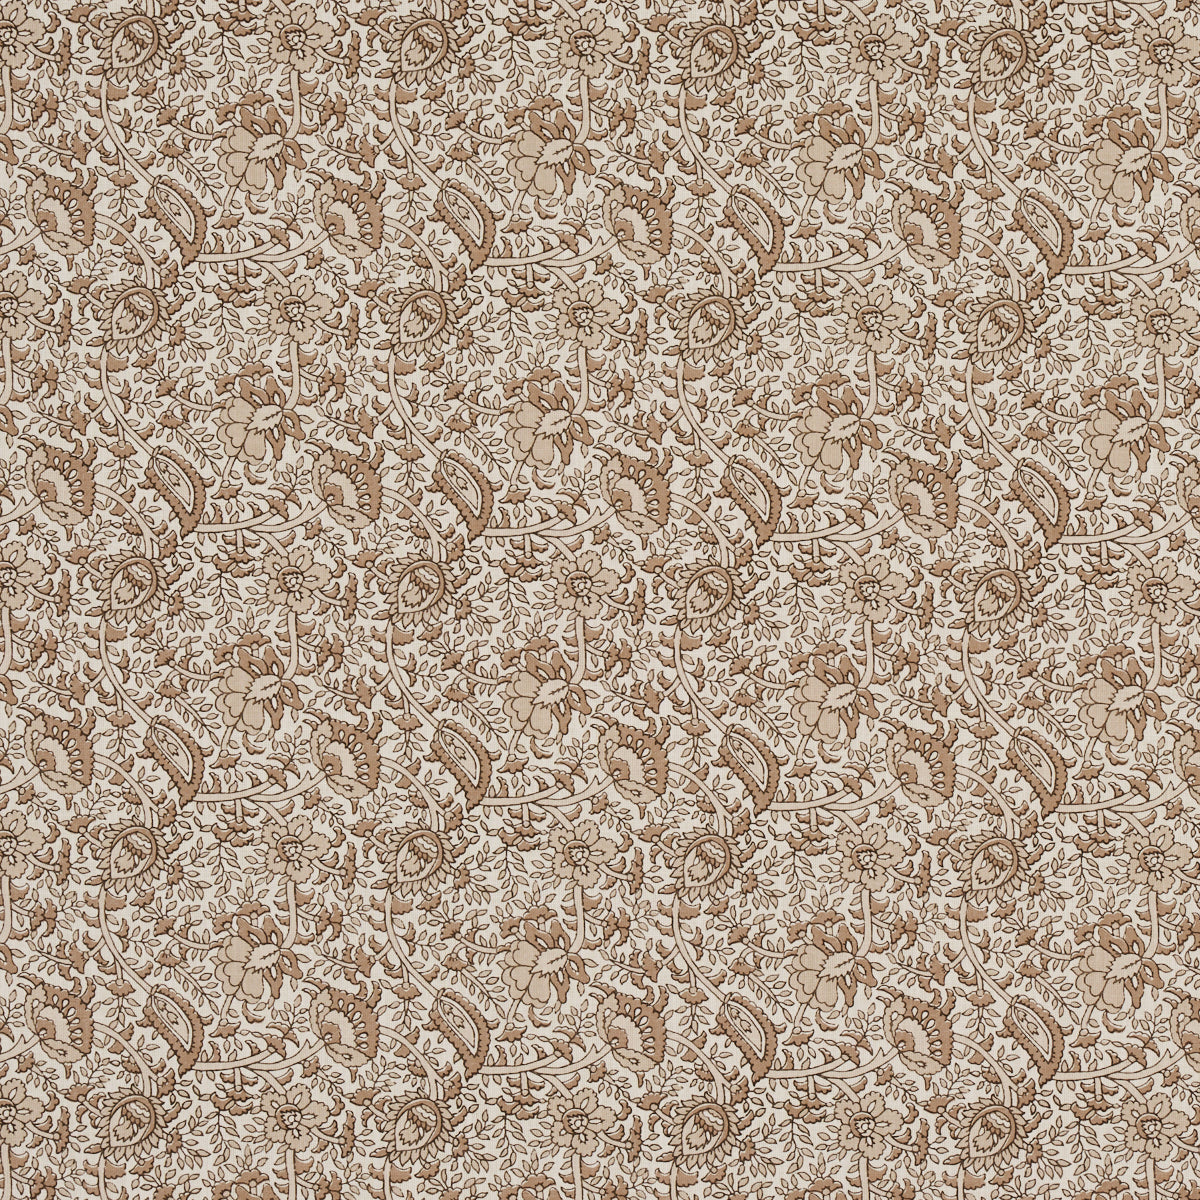 Purchase 180712 Daisy Indoor/Outdoor, Neutral by Schumacher Fabric